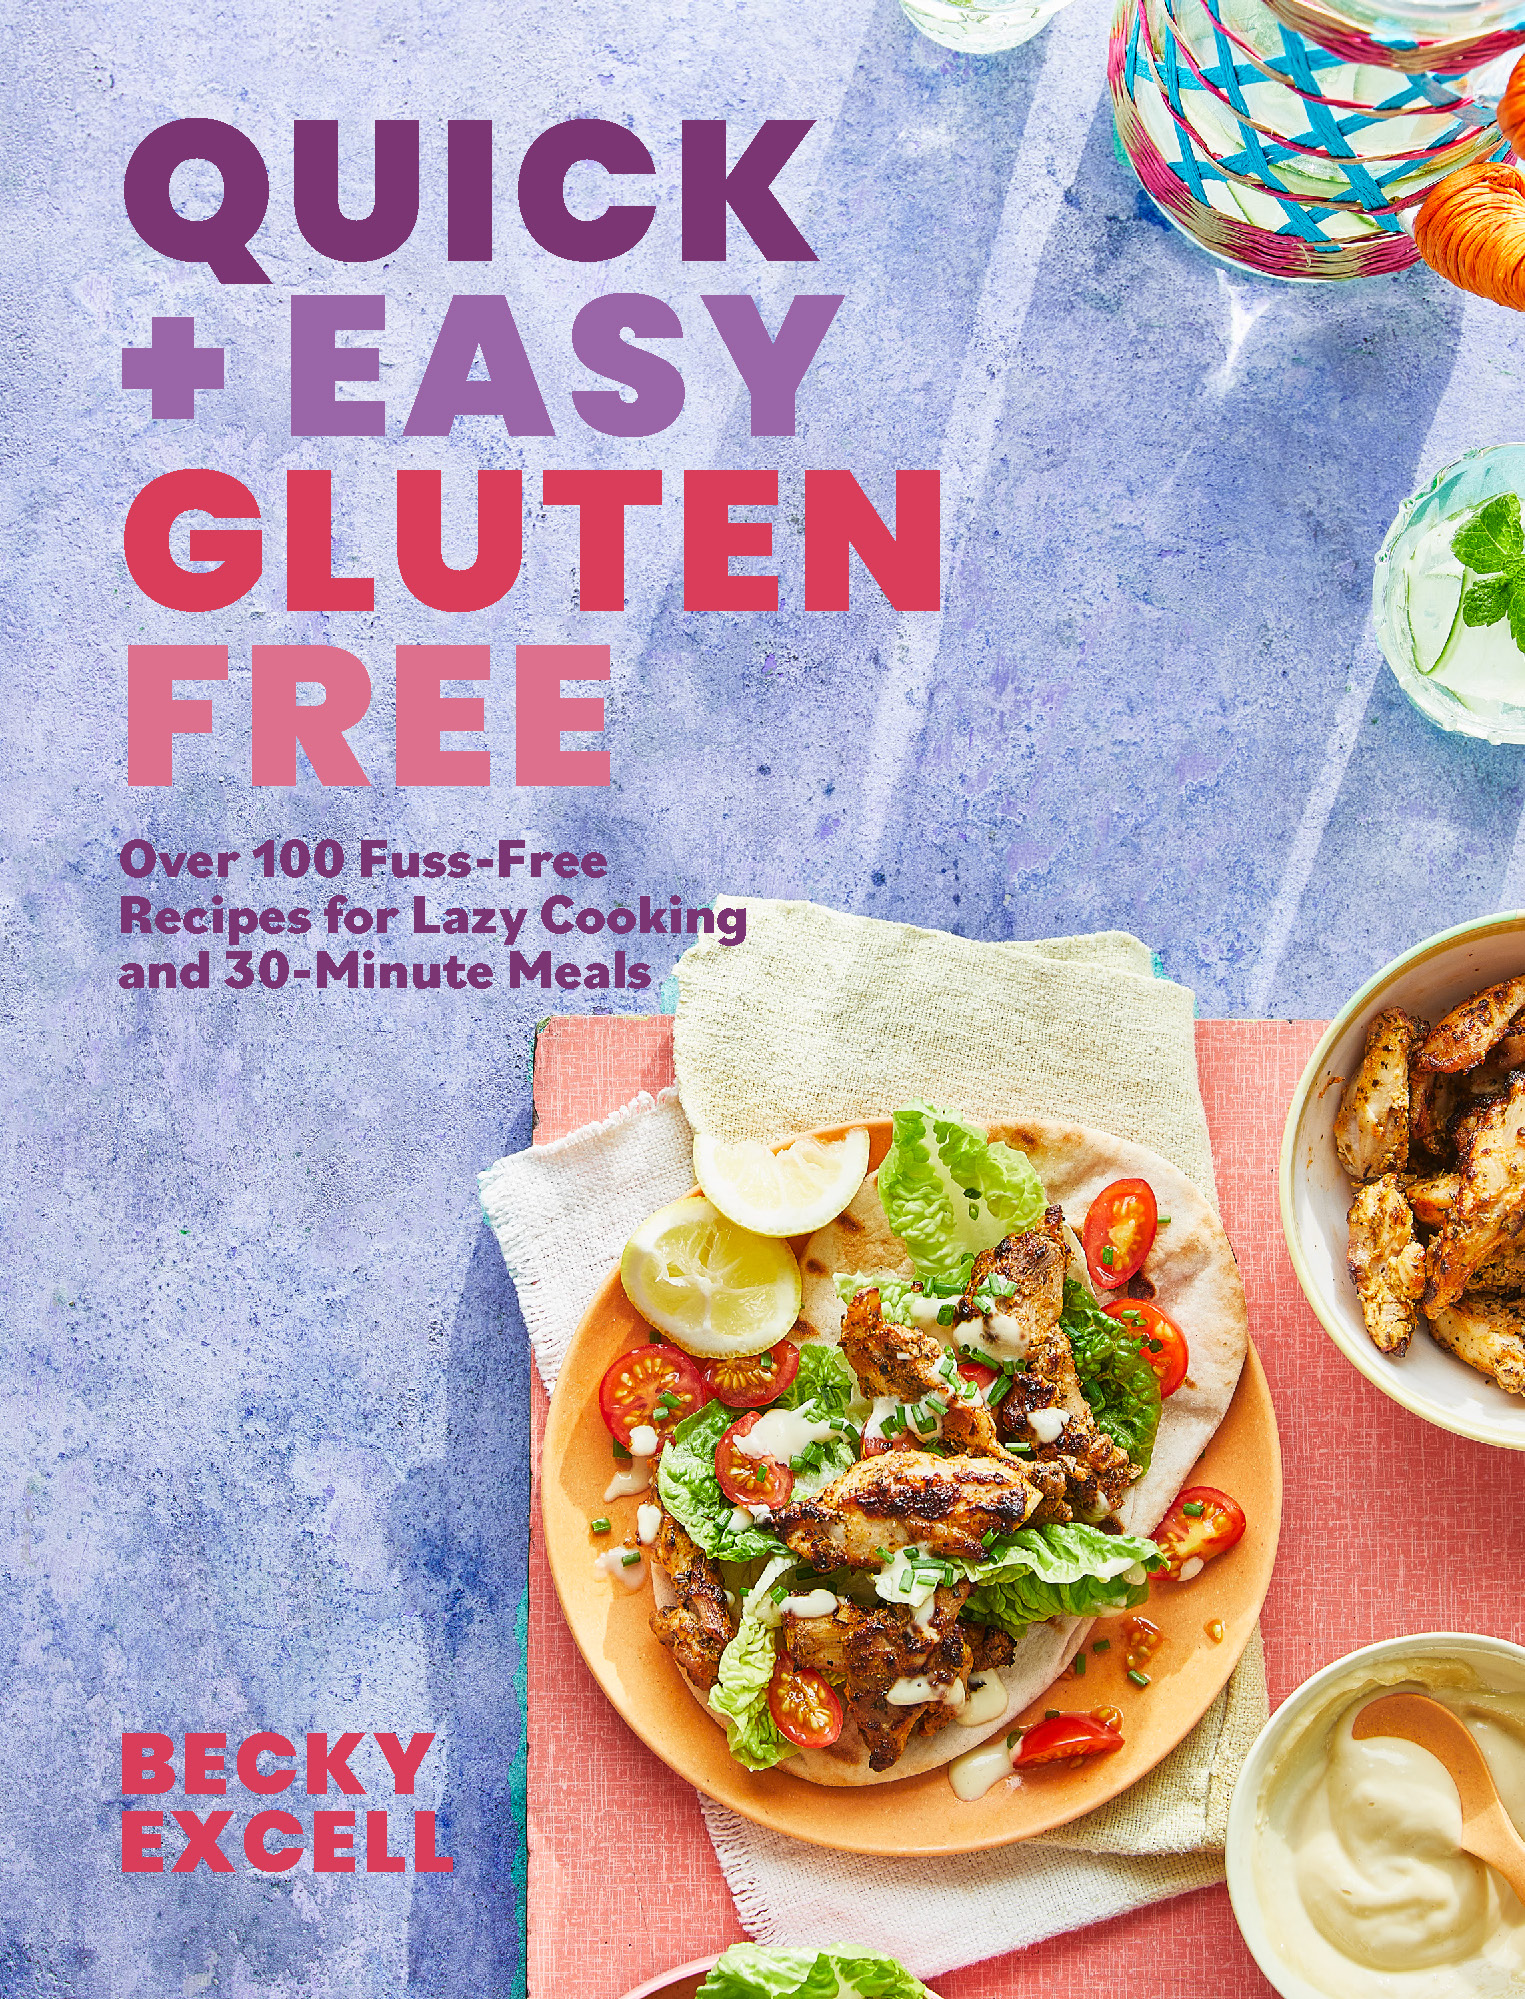 Cover of Quick & Easy Gluten Free by Becky Excell featuring a gluten-free pita on an orange plate on a pink table.